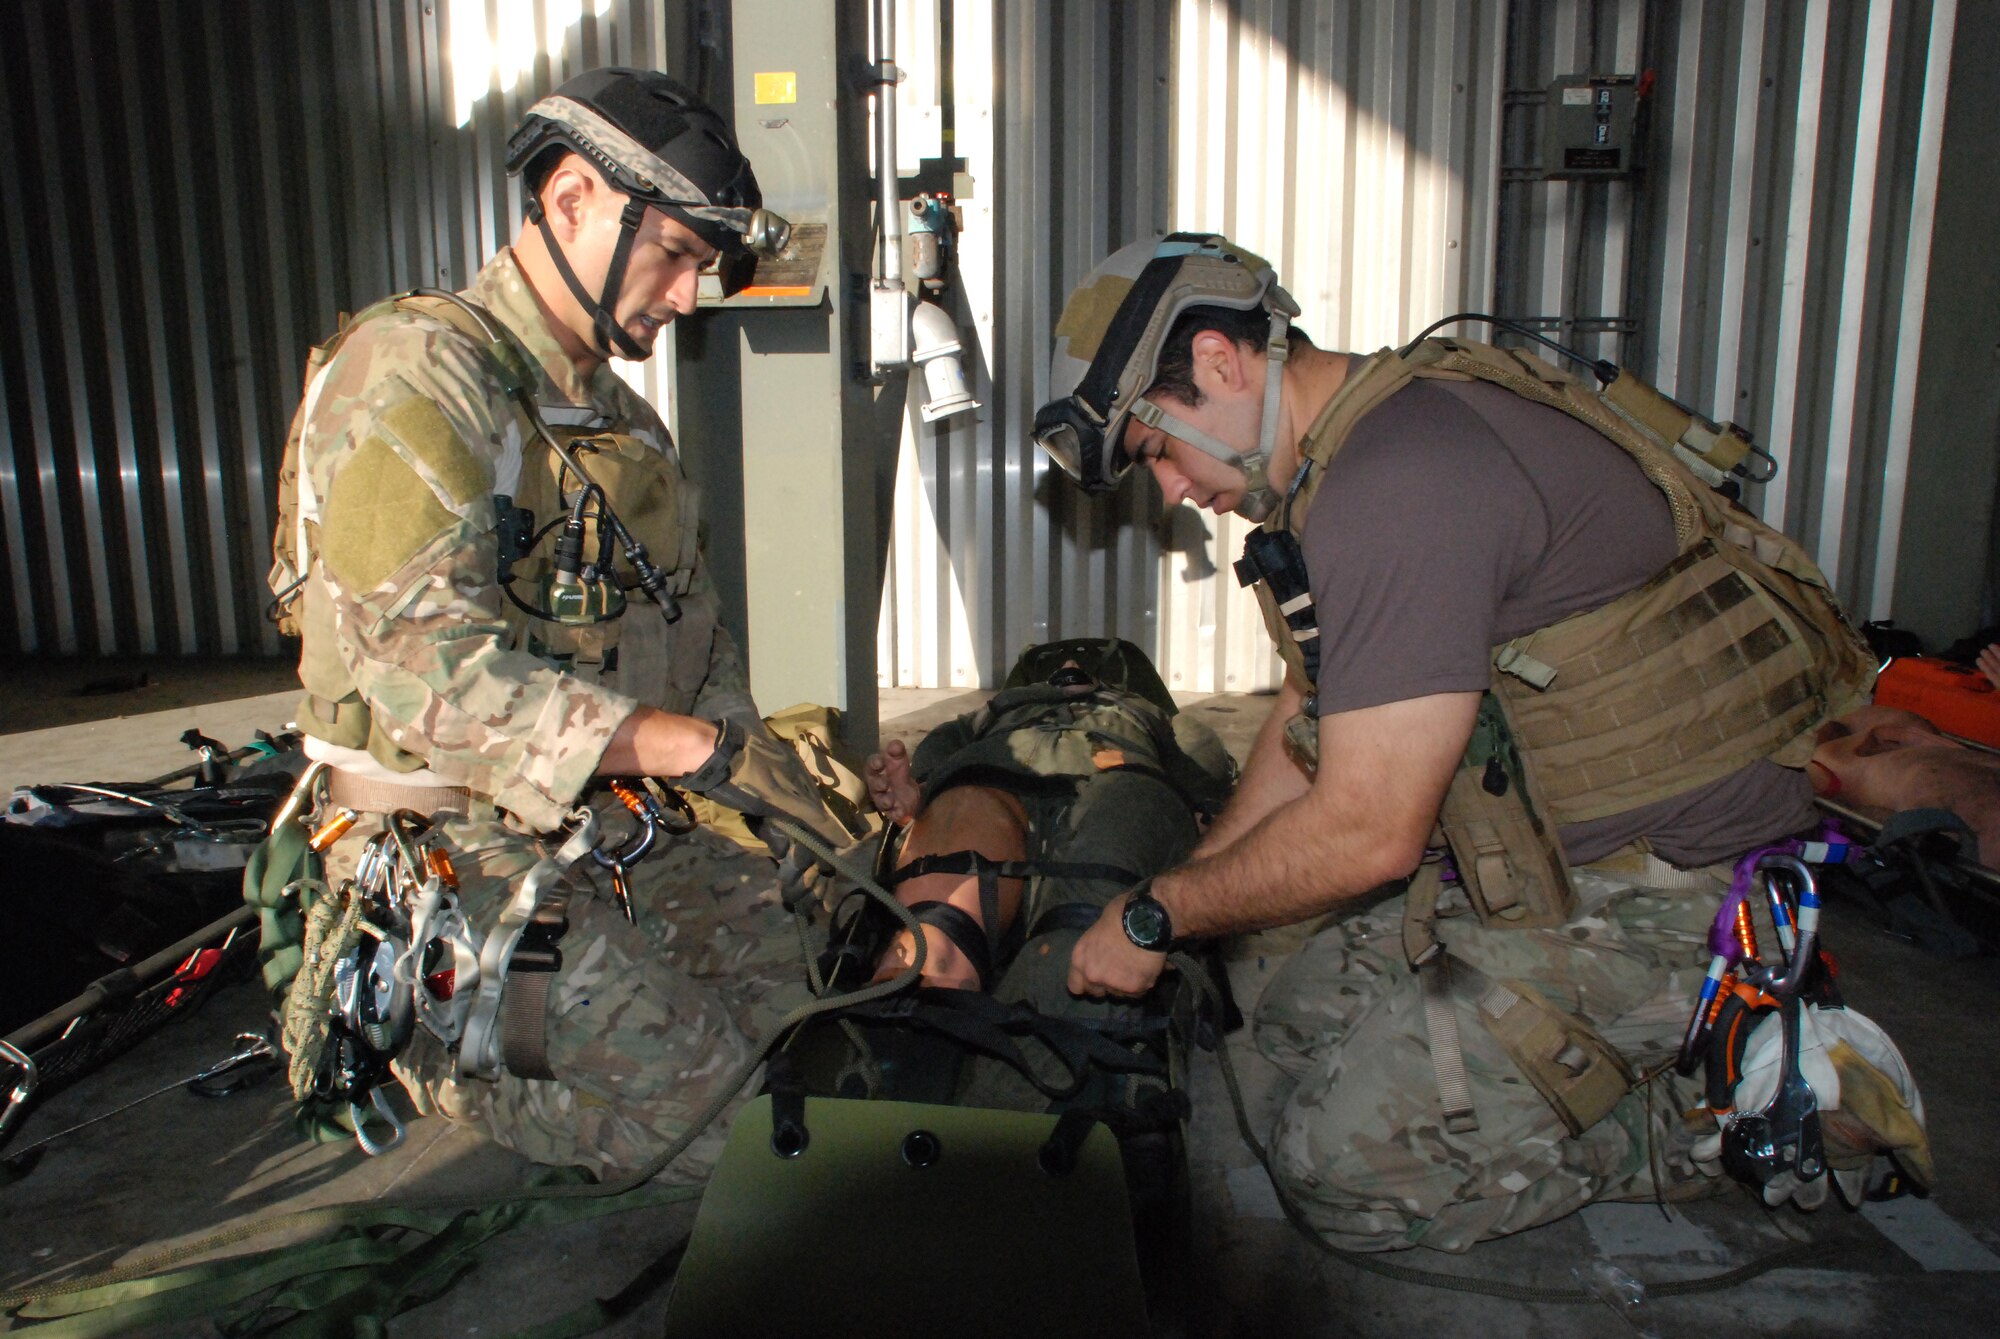 Pararescue - The Special Ops Unit That Rescues Navy SEALS